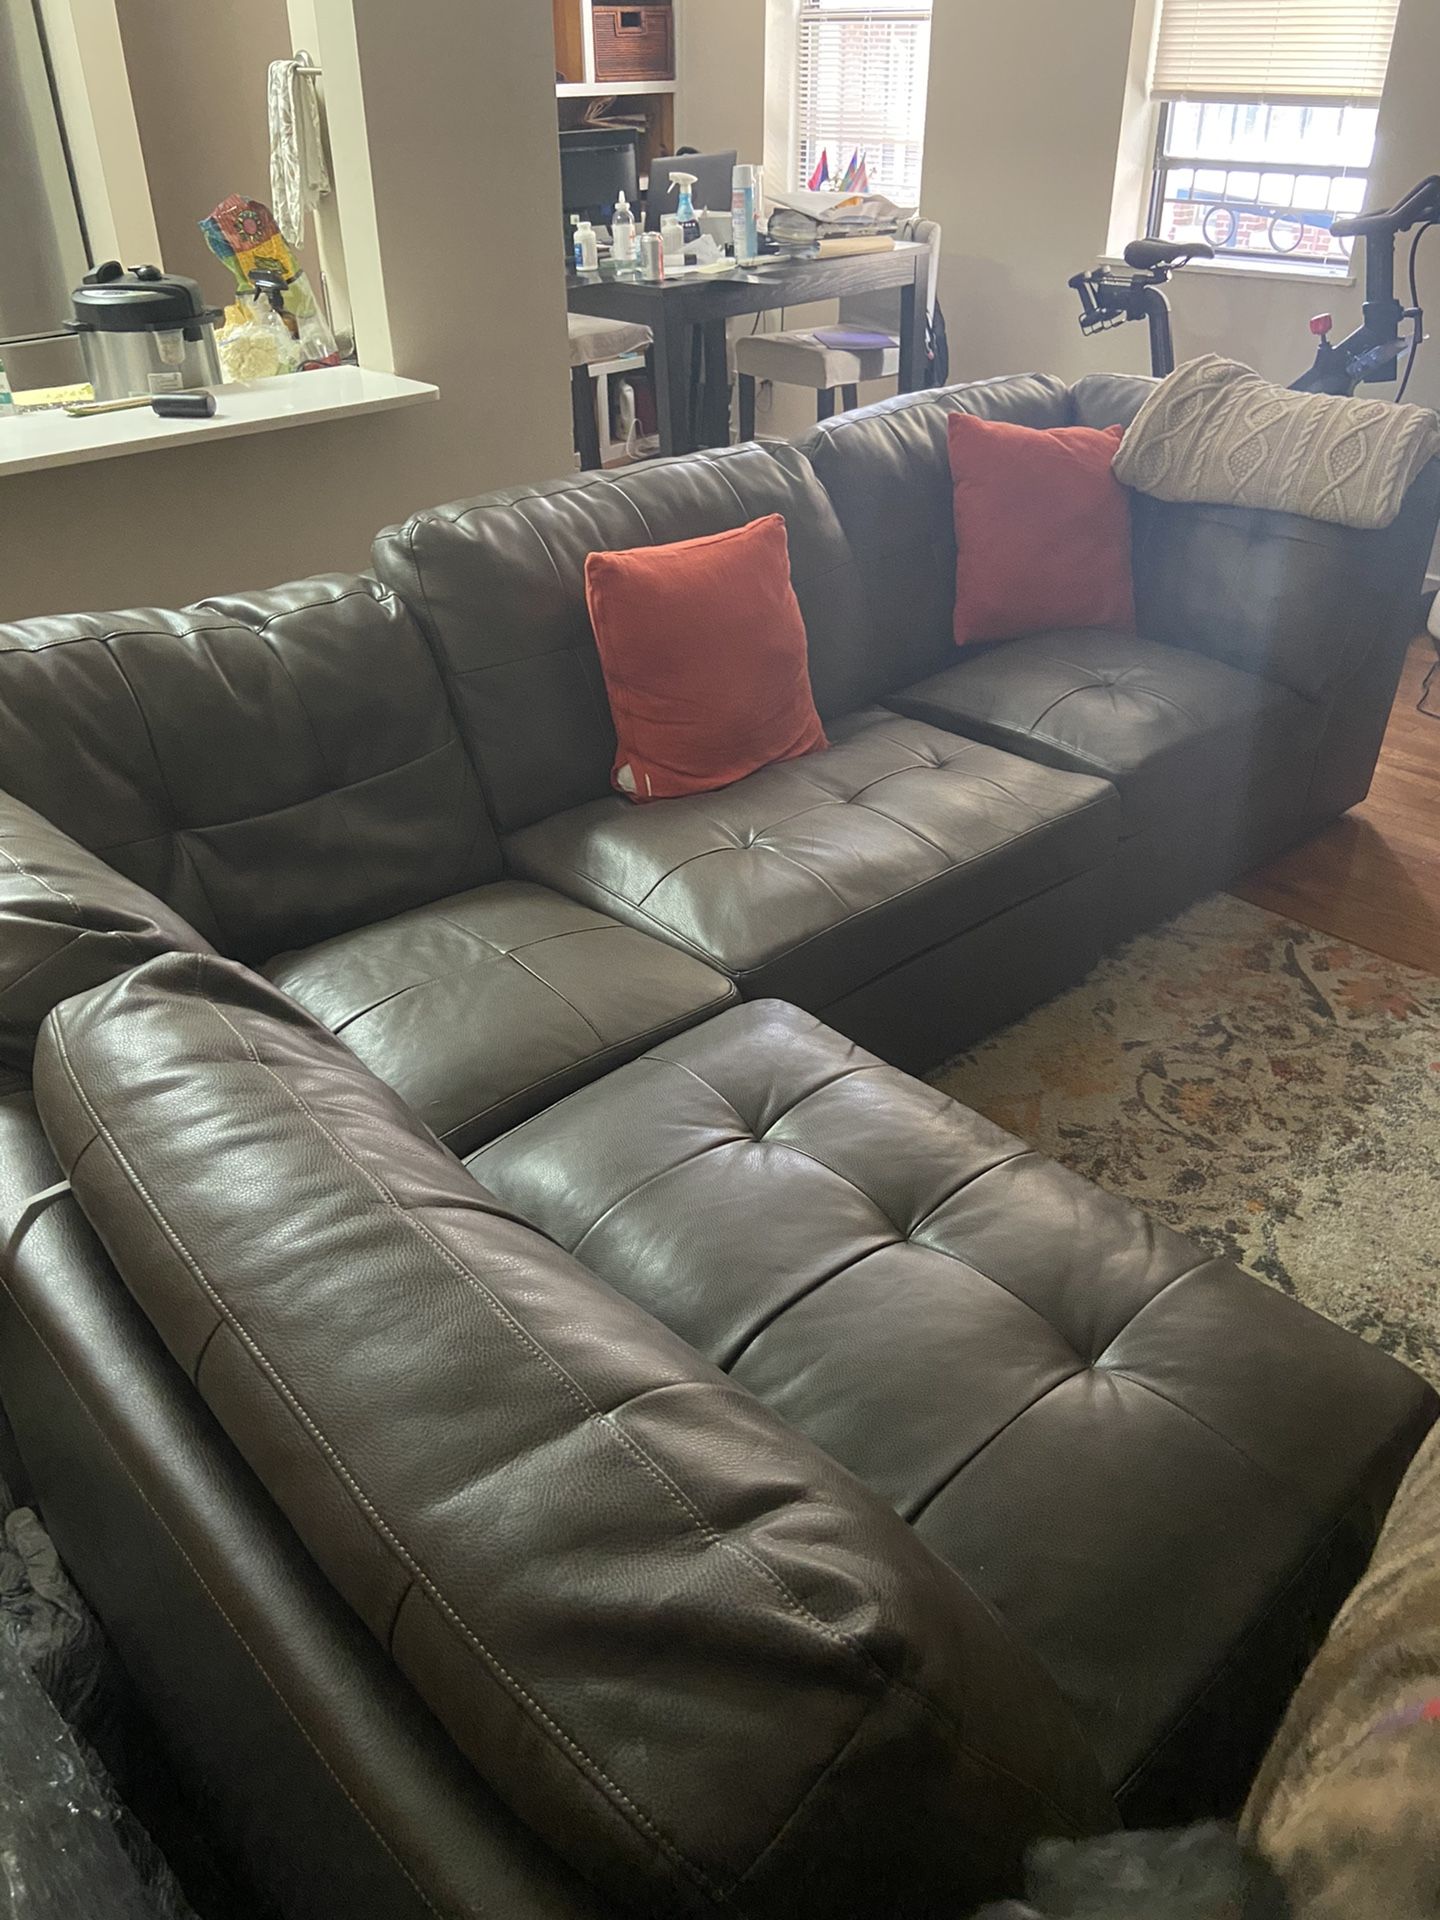 Faux leather sectional